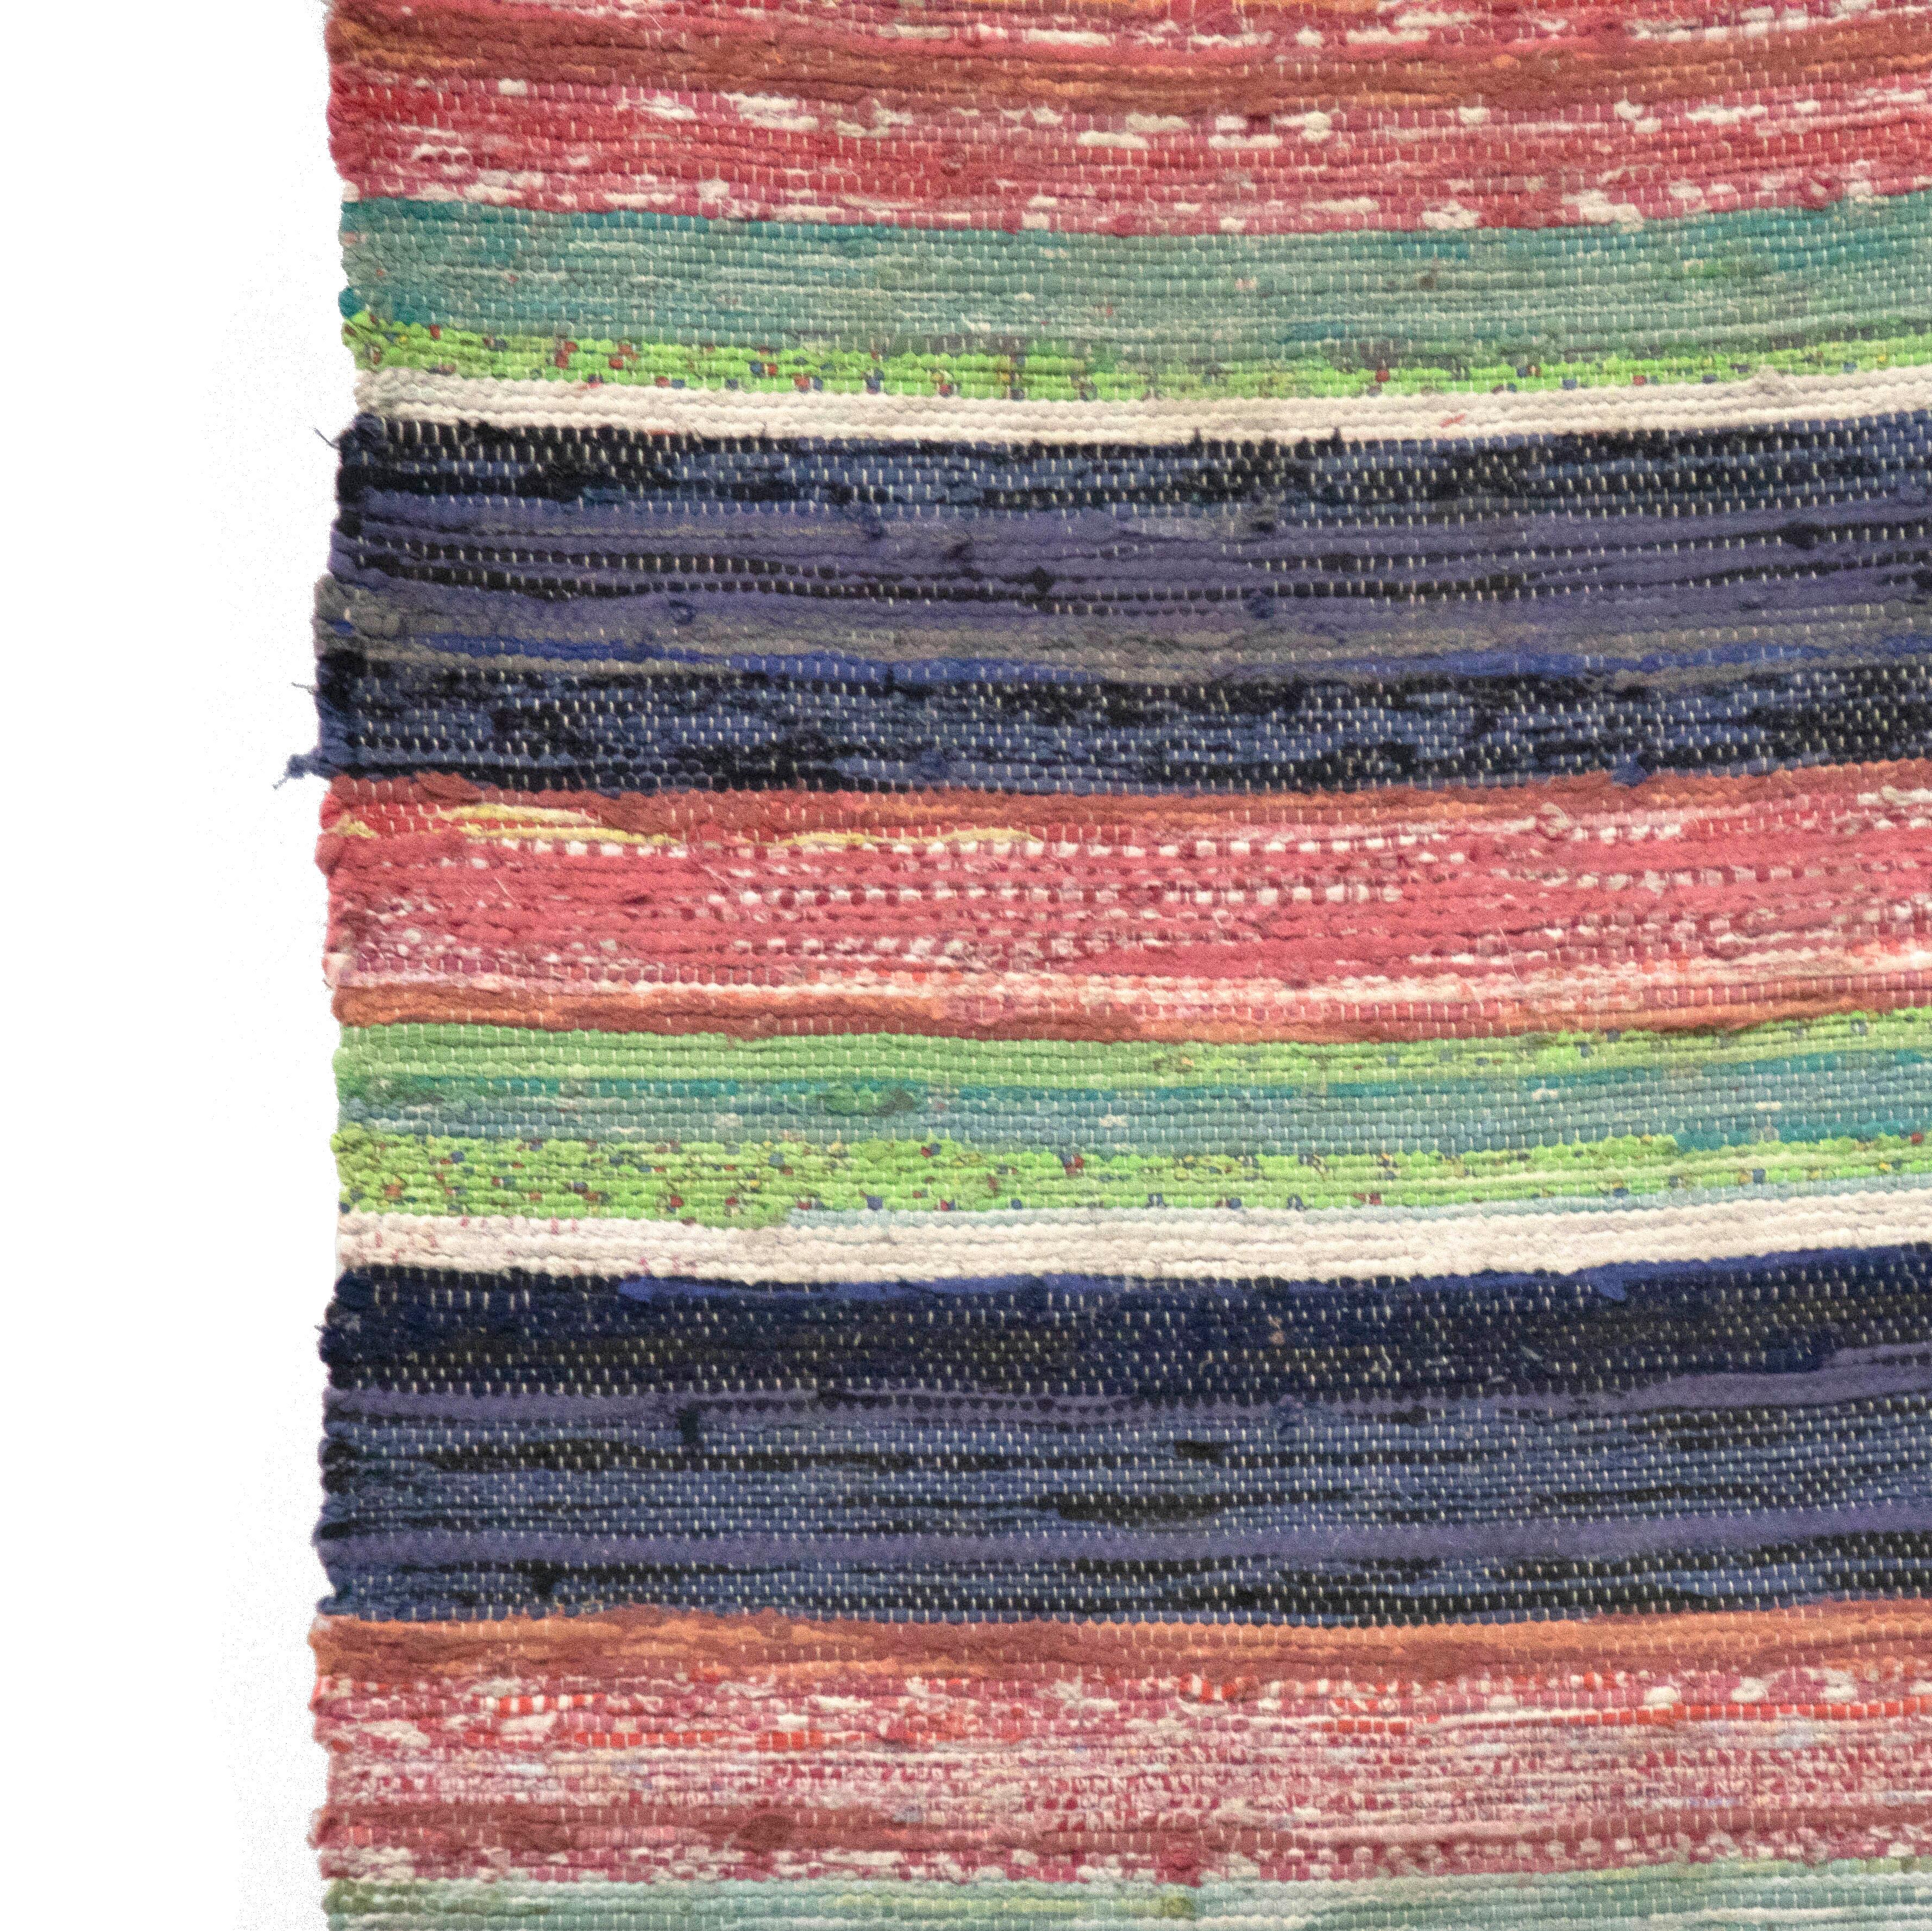 20th century Swedish rag rug. Featuring a stripe design in tones of blue, green, and red. This rug is machine washable at 30 degrees.
RT6024606.